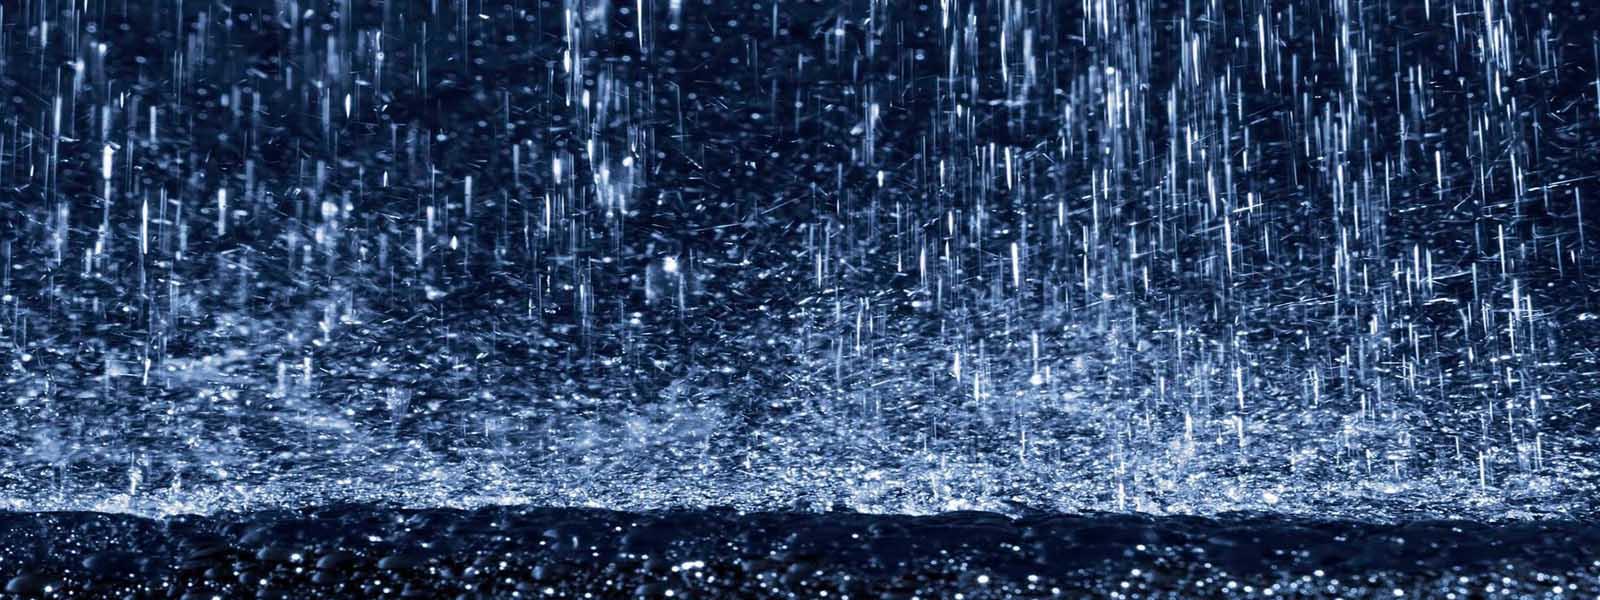 Heavy rains expected in many areas